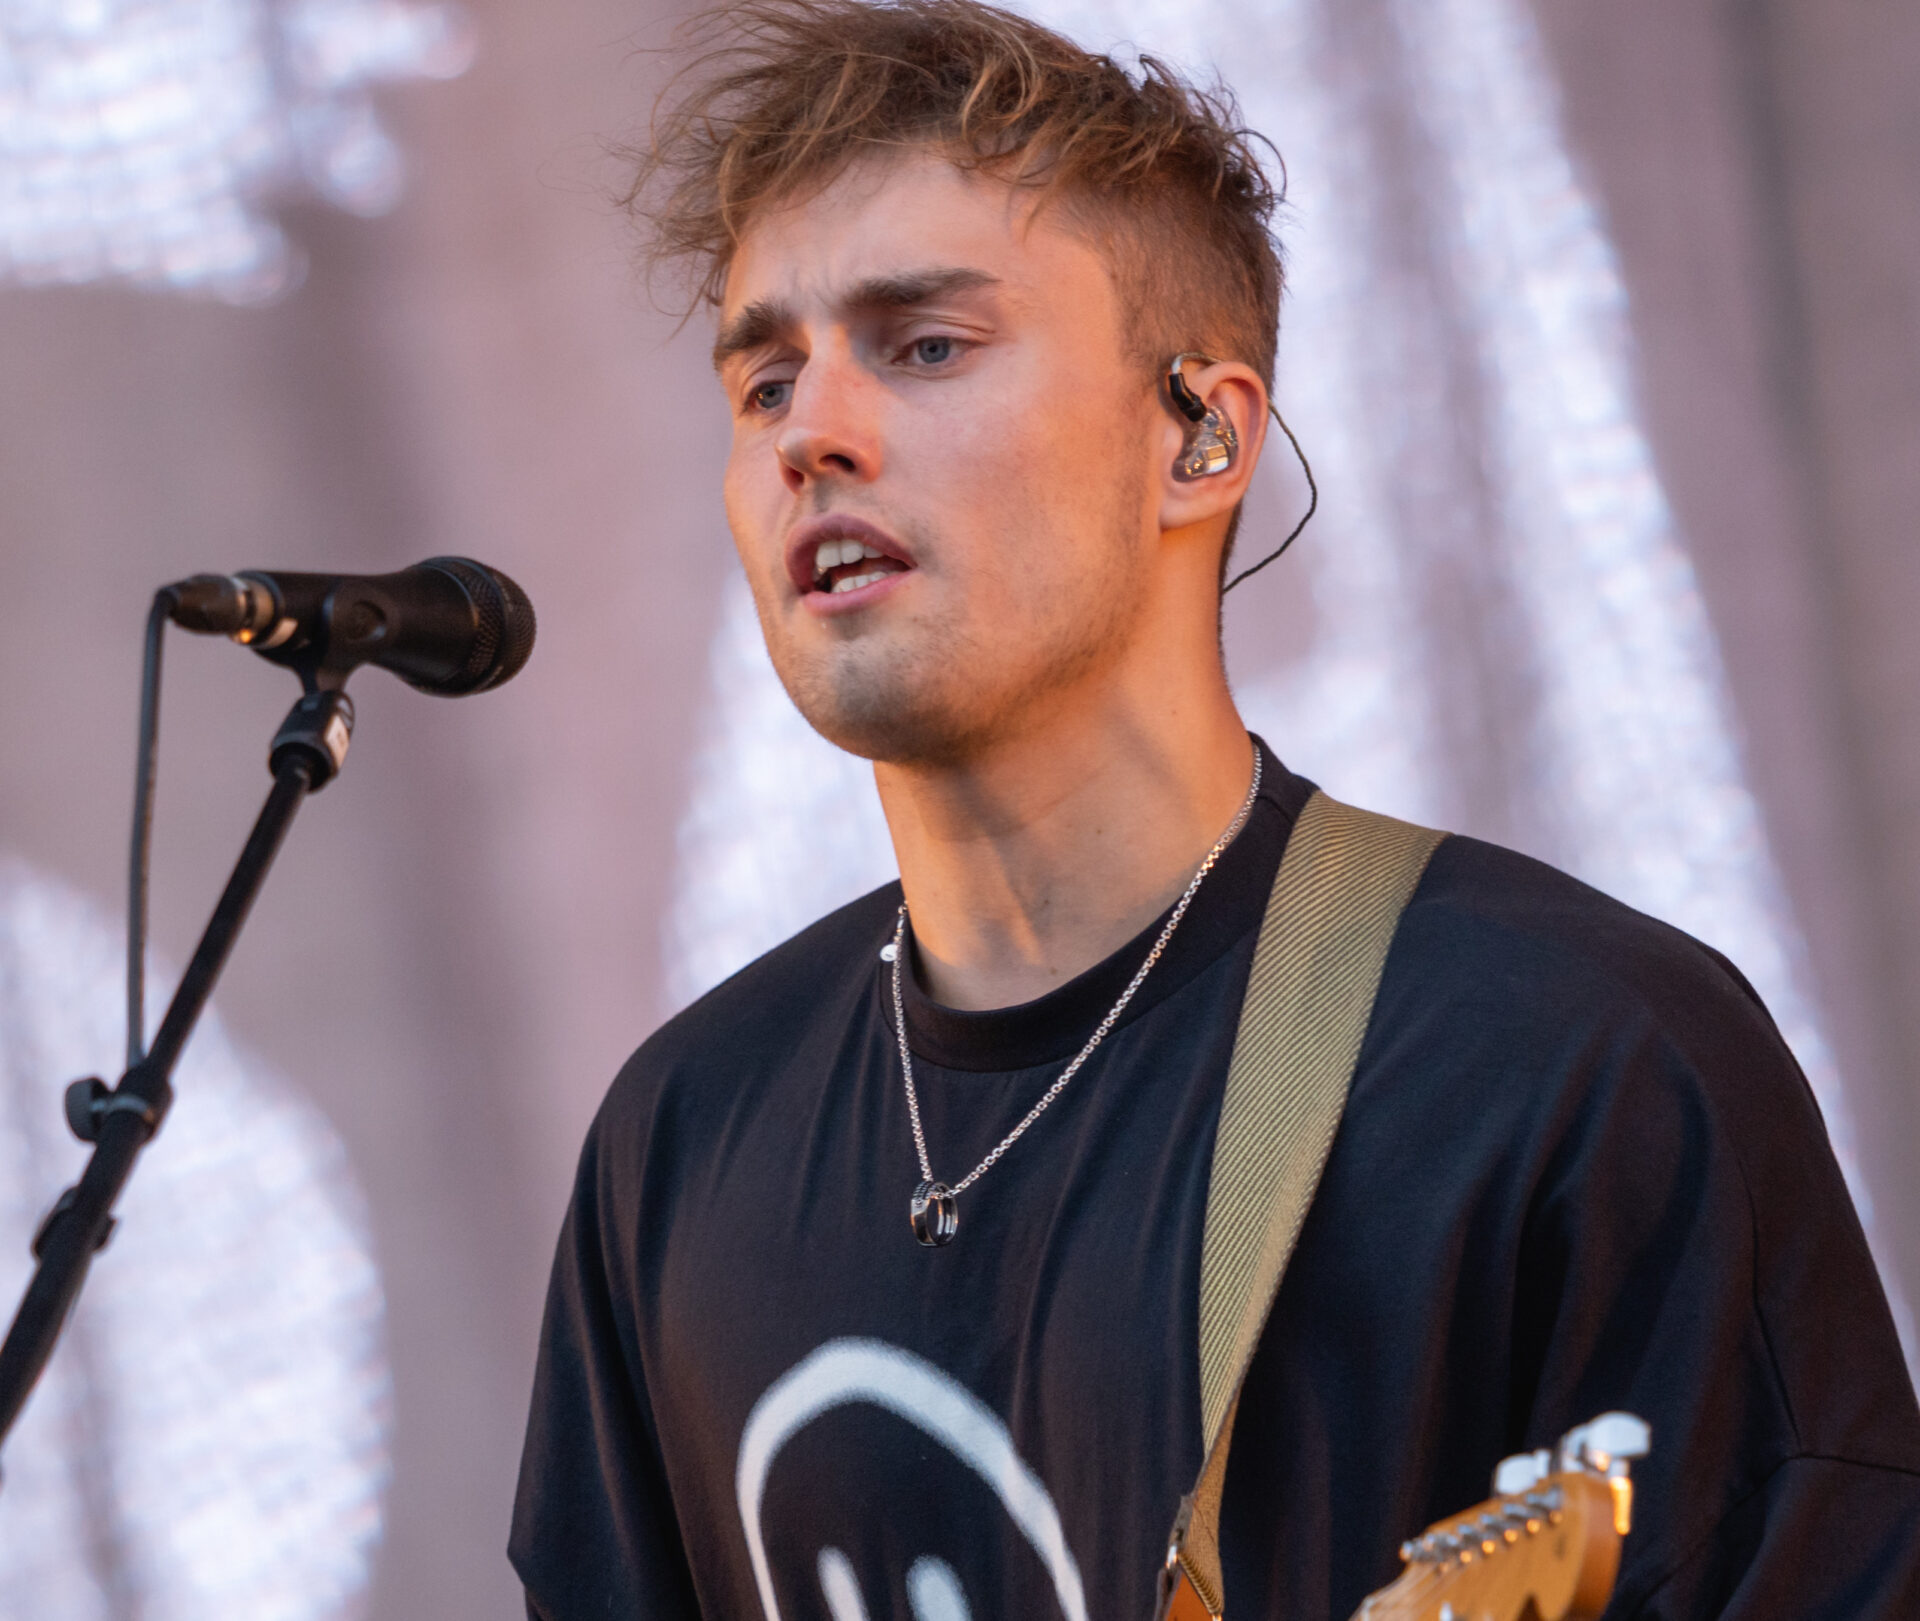 Sam Fender said he considered selling drugs before music provided a way out